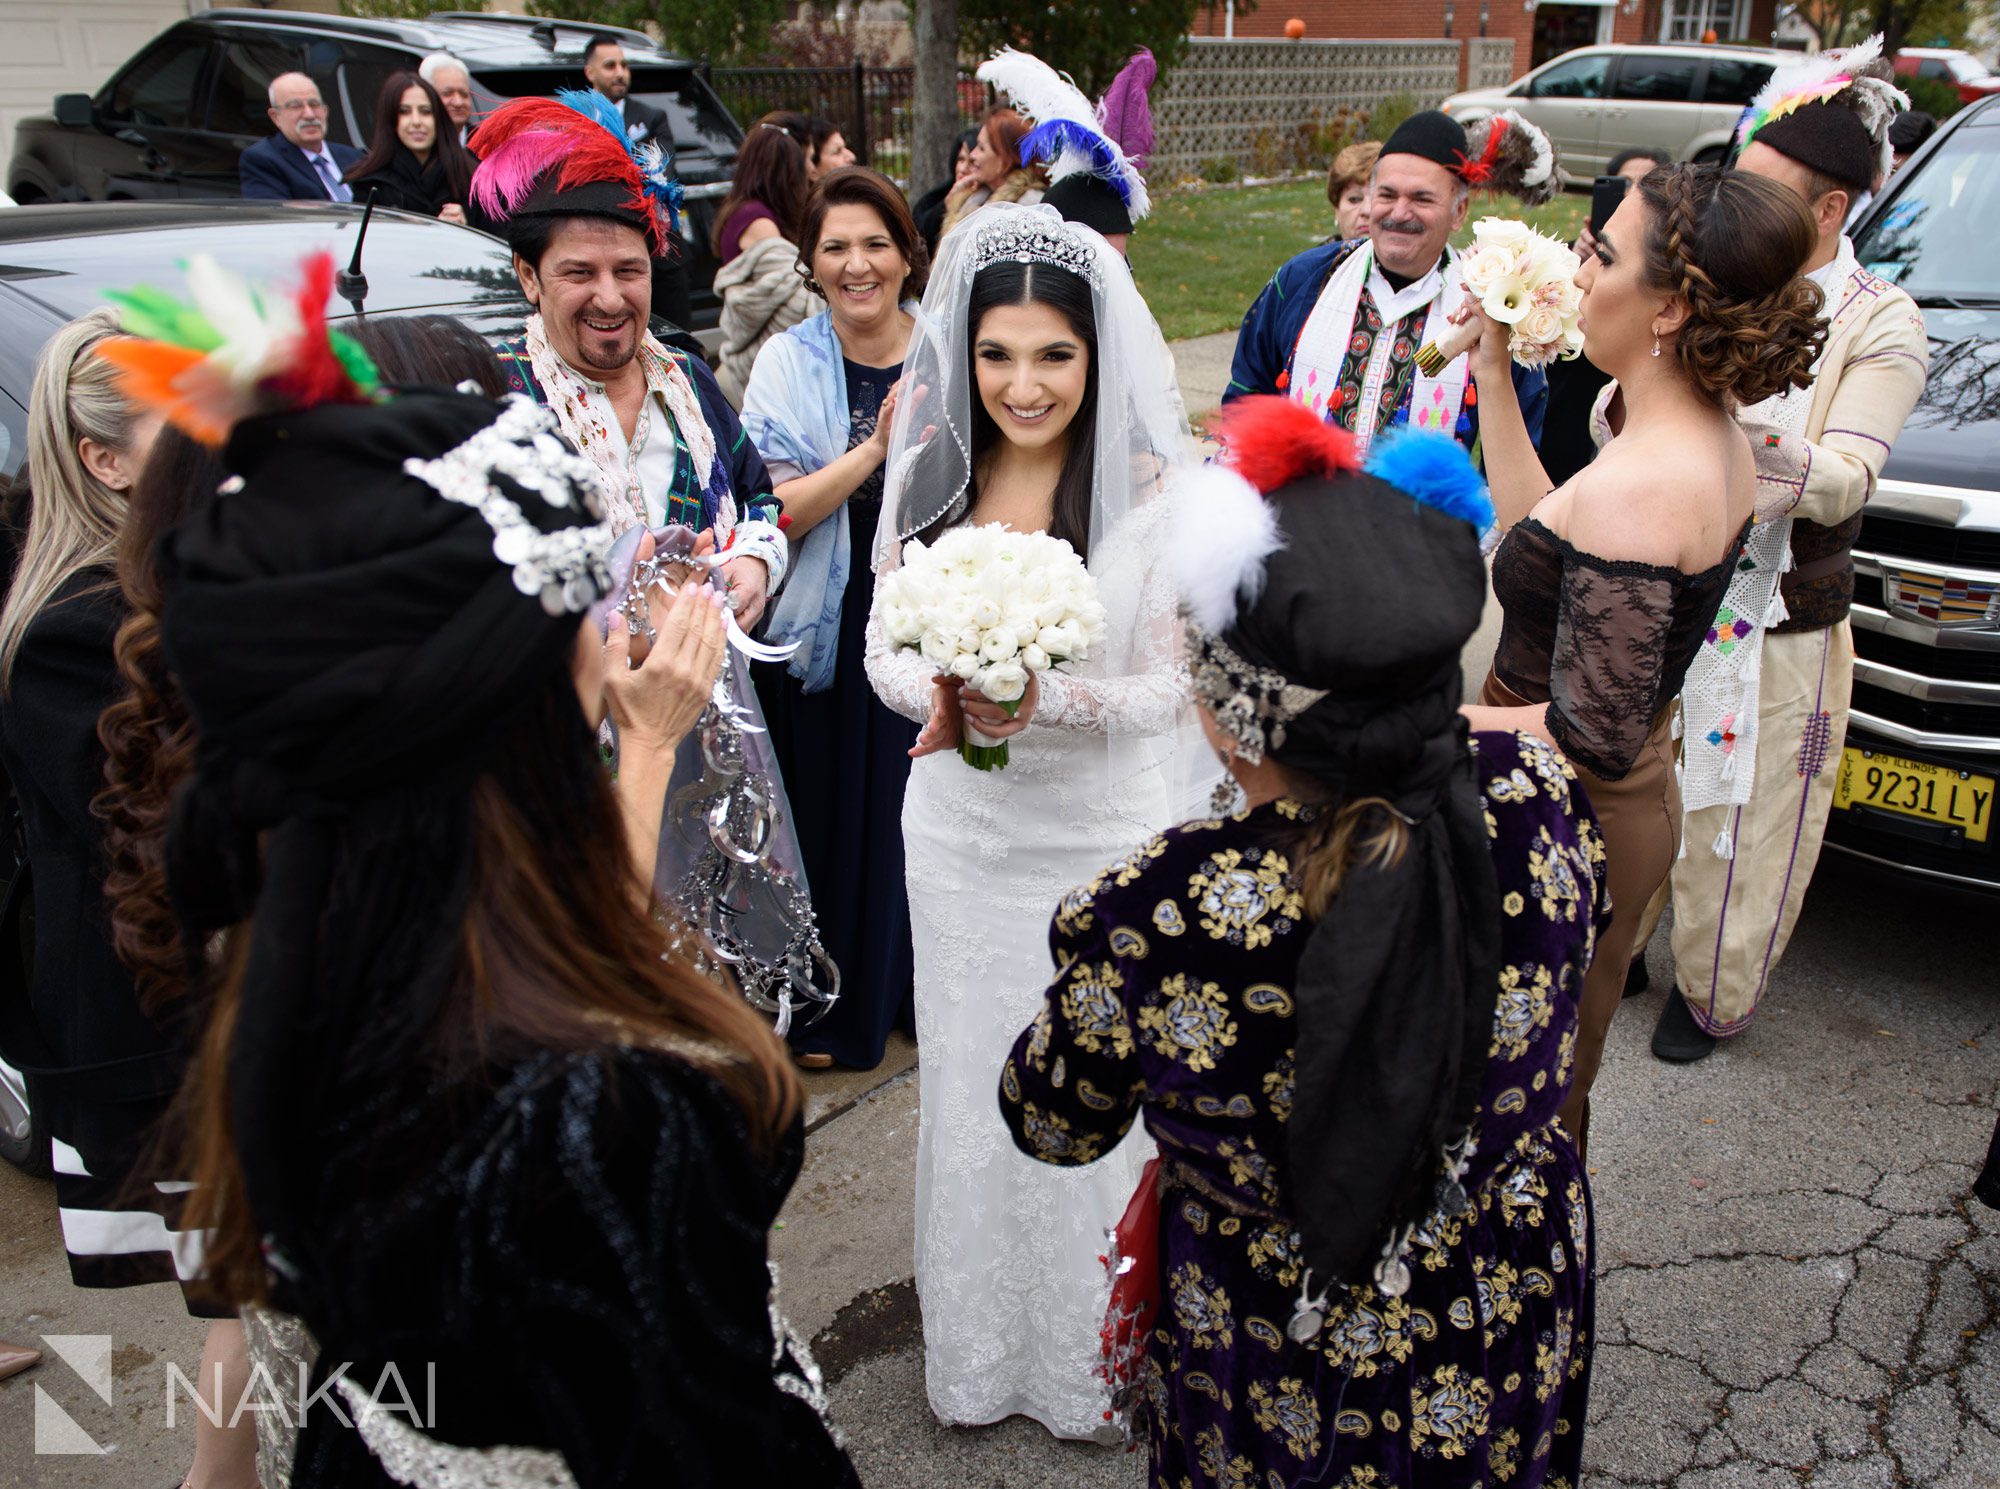 Assyrian wedding traditions picture chicago bride